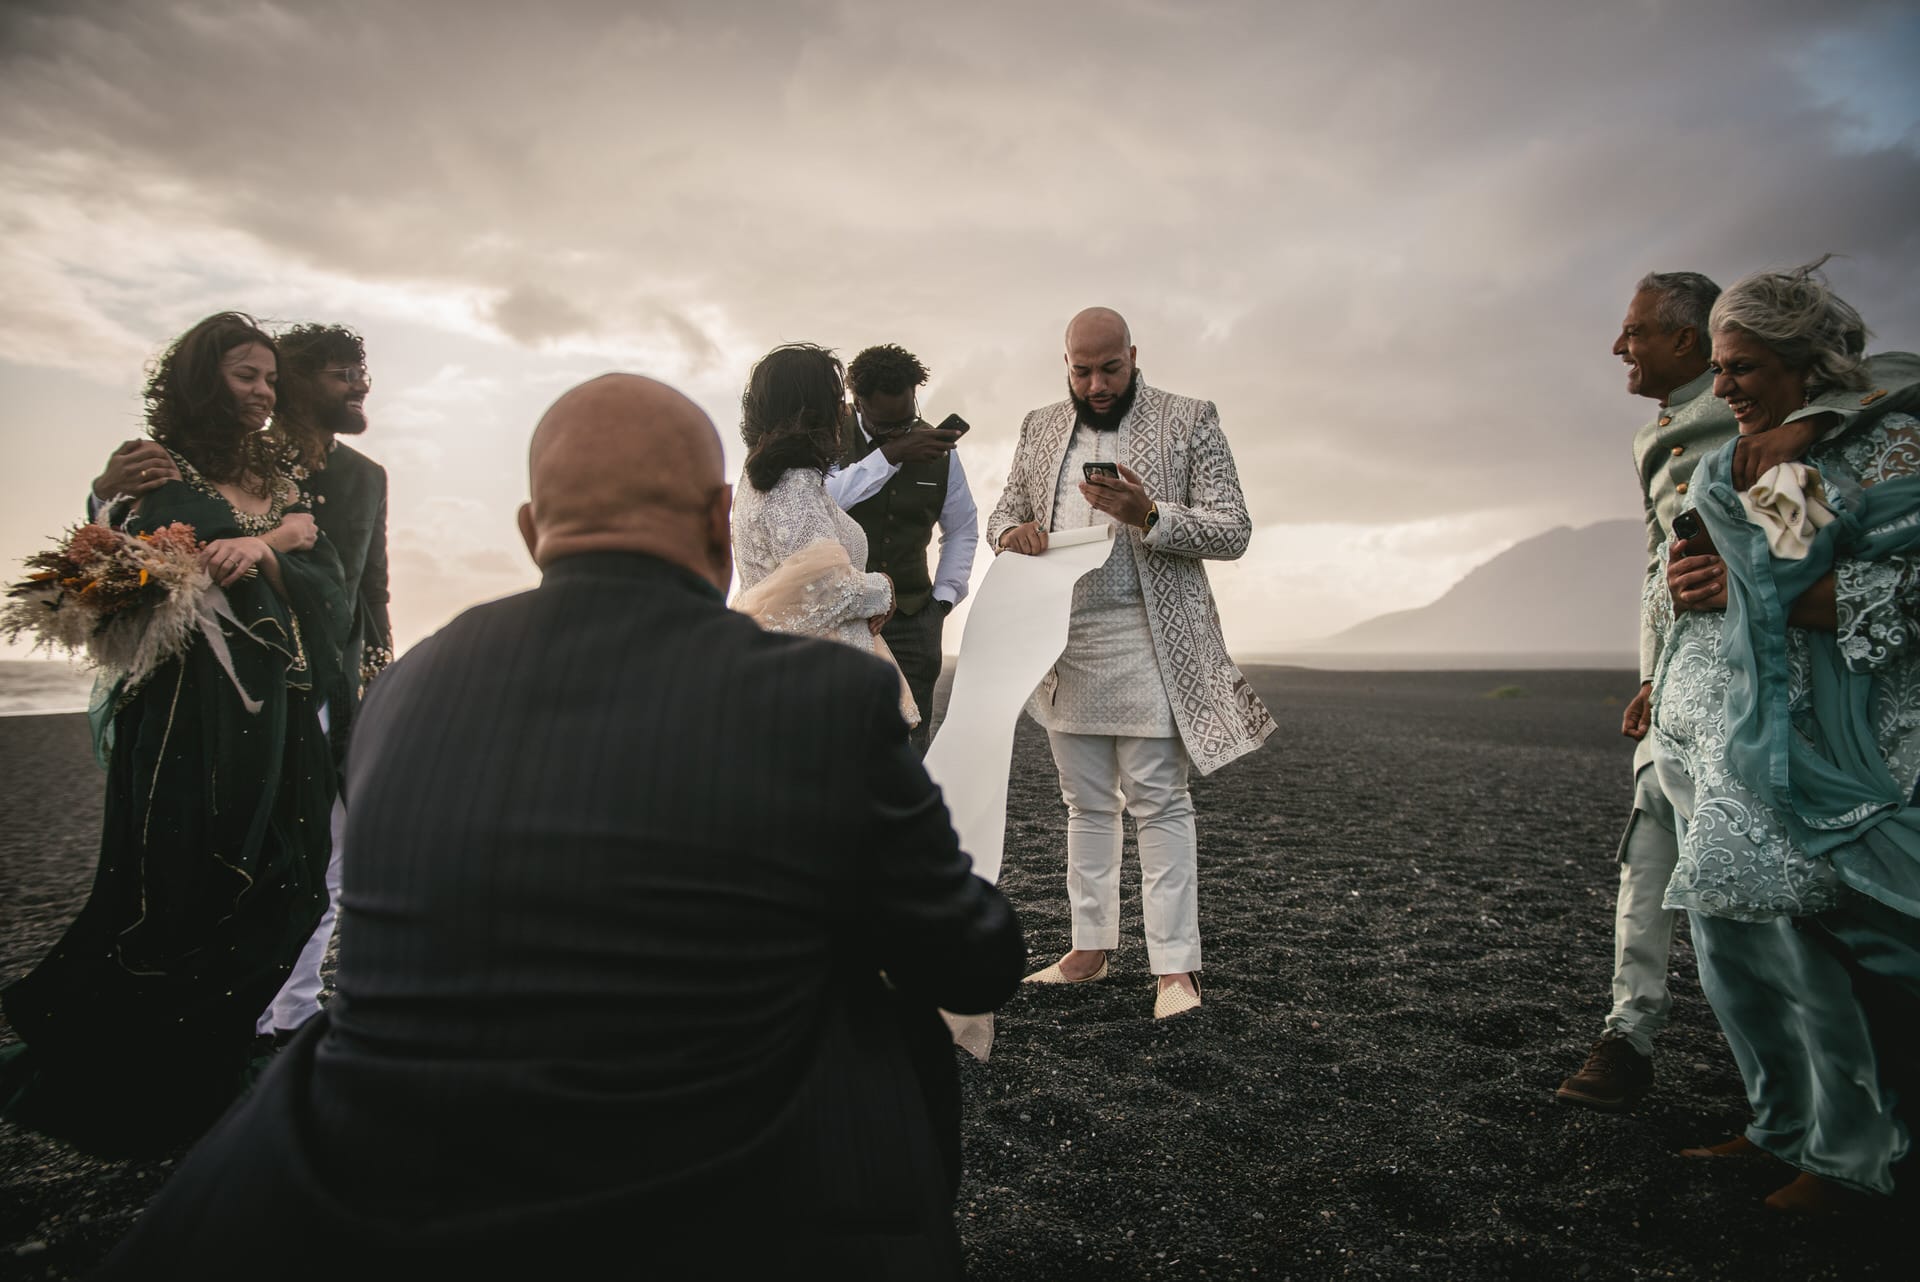 Elopement bliss on East Iceland's shores